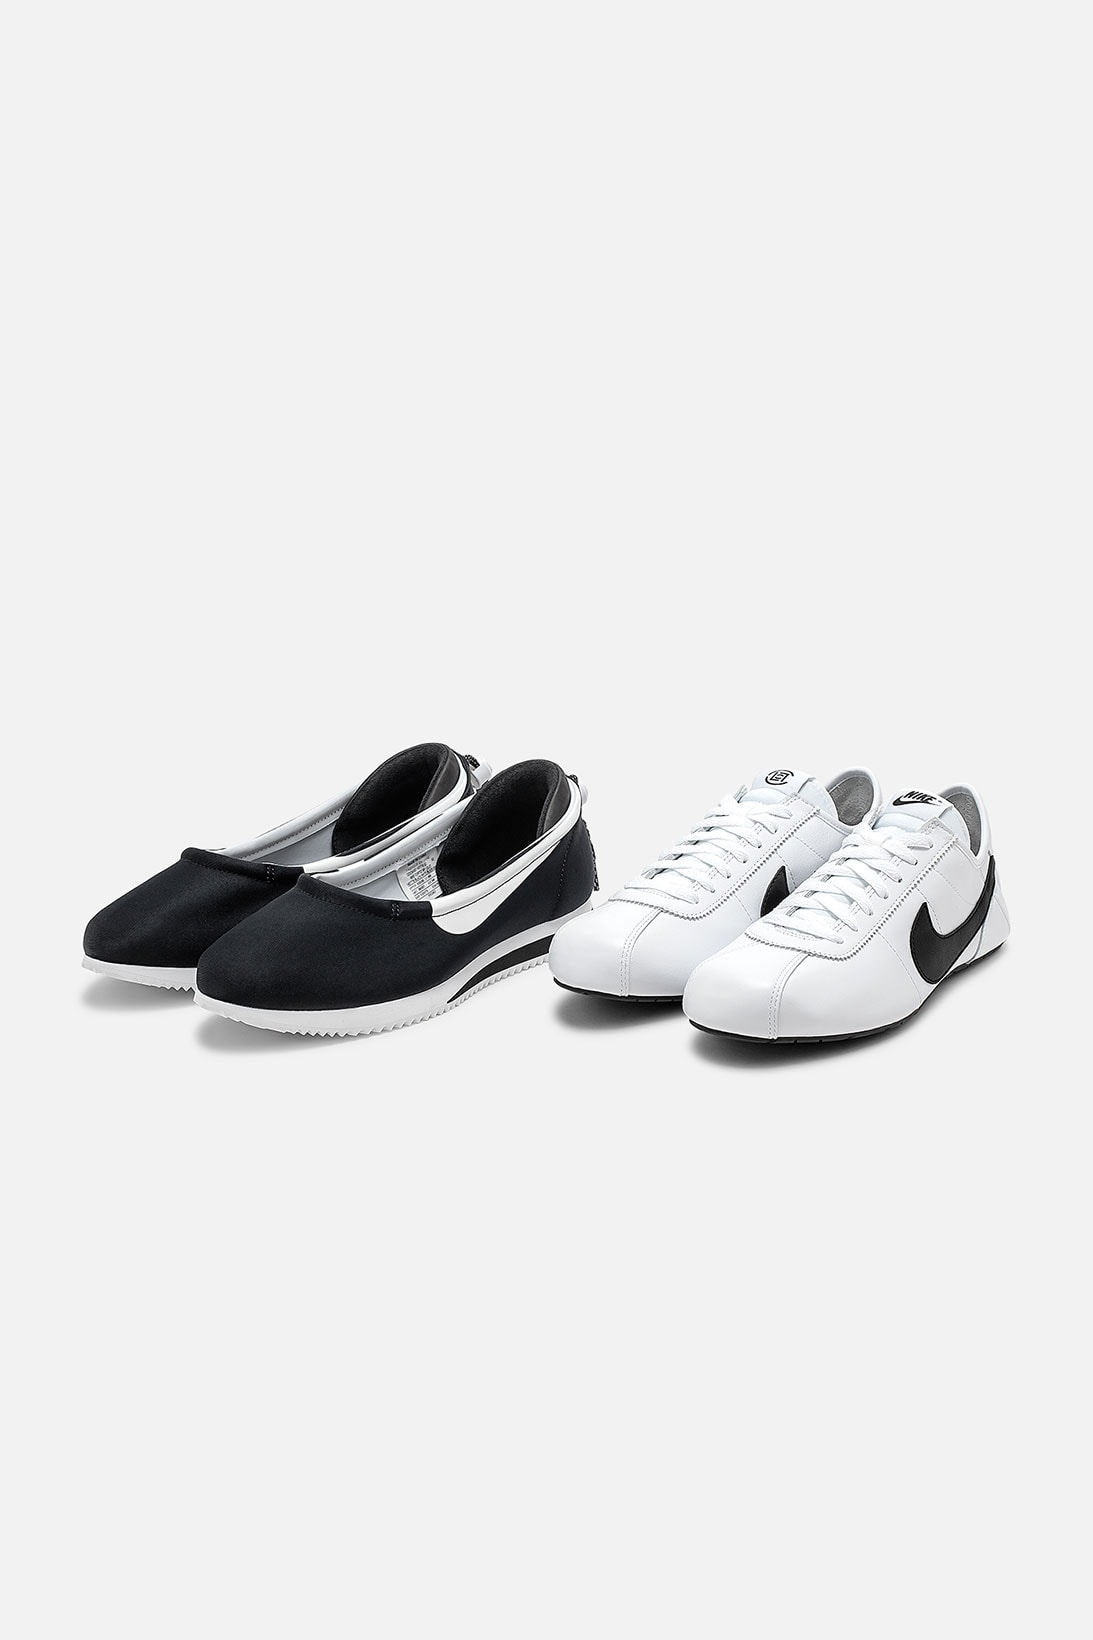 CLOT Nike Cortez CLOTEZ Collaboration 3-in-1 Sneakers Yin-Yang Kung Fu Release Where to buy